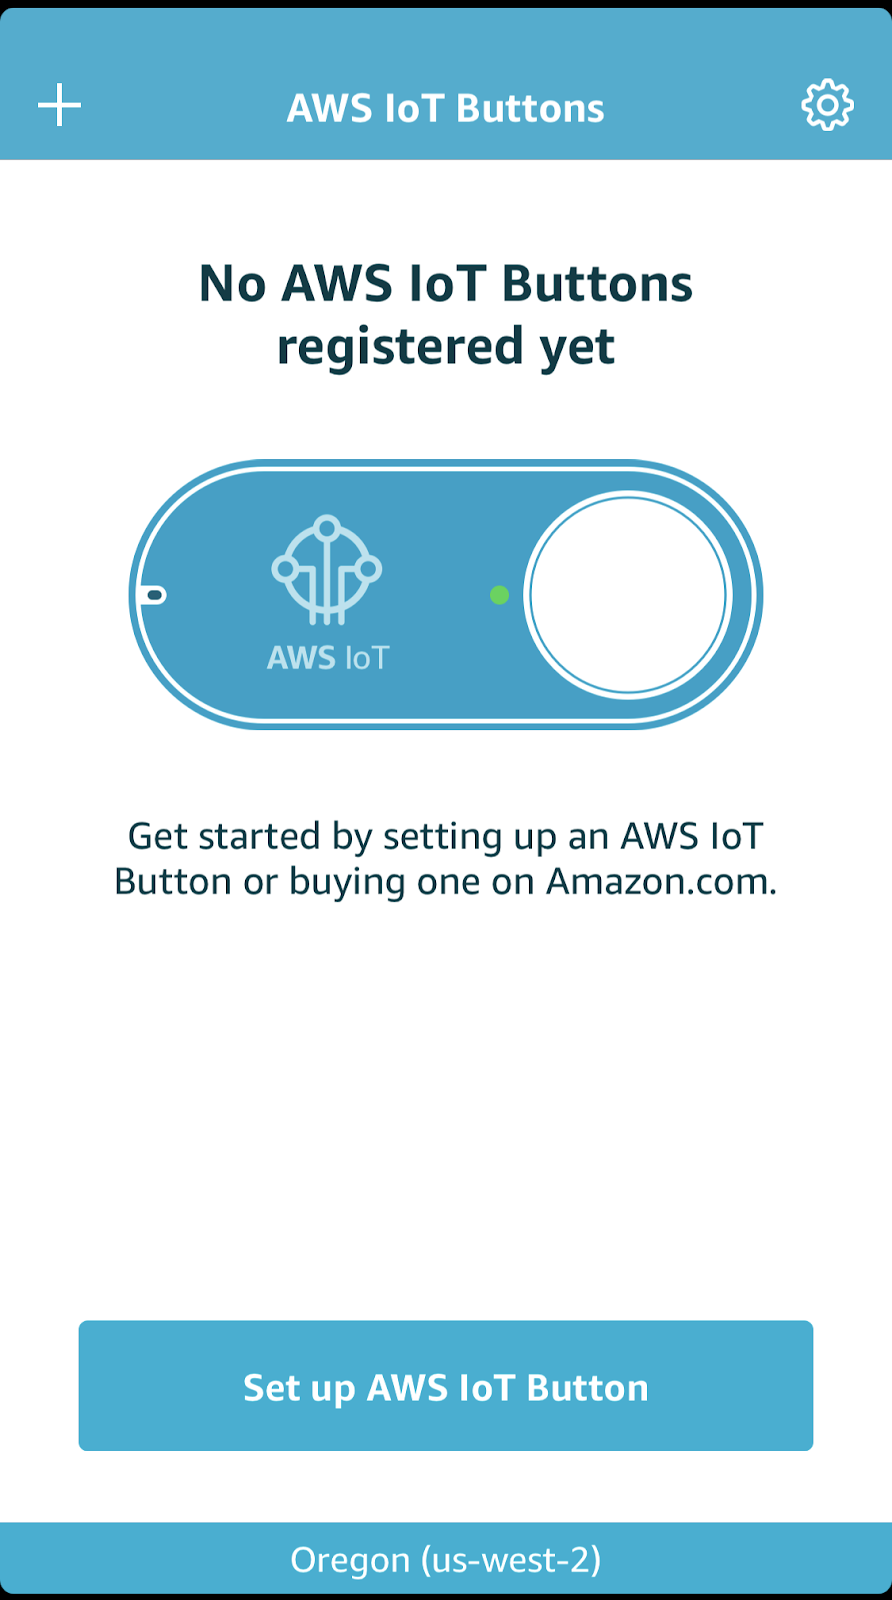 iOS Native App to register IoT Button